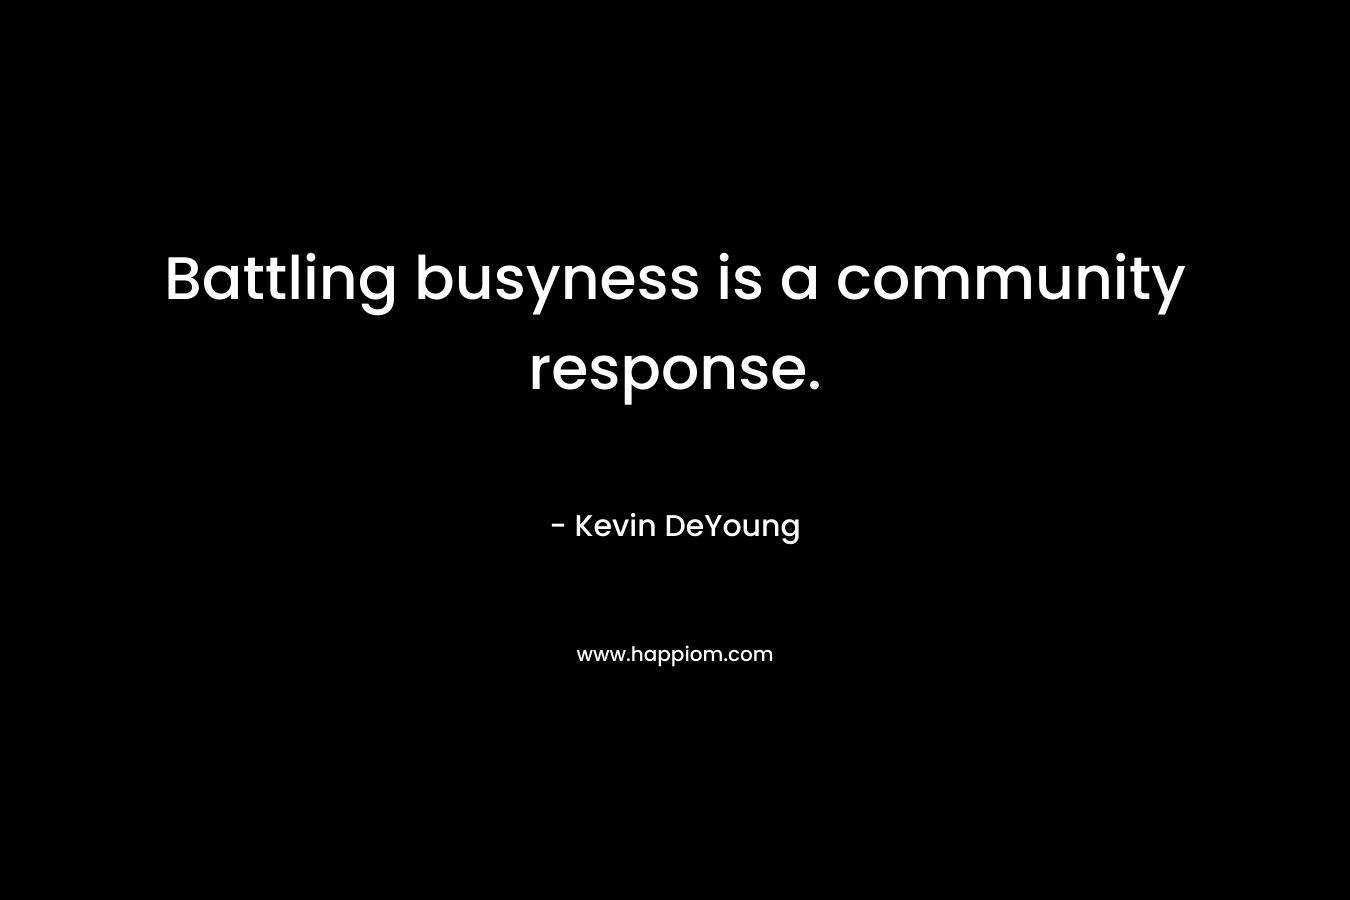 Battling busyness is a community response. – Kevin DeYoung